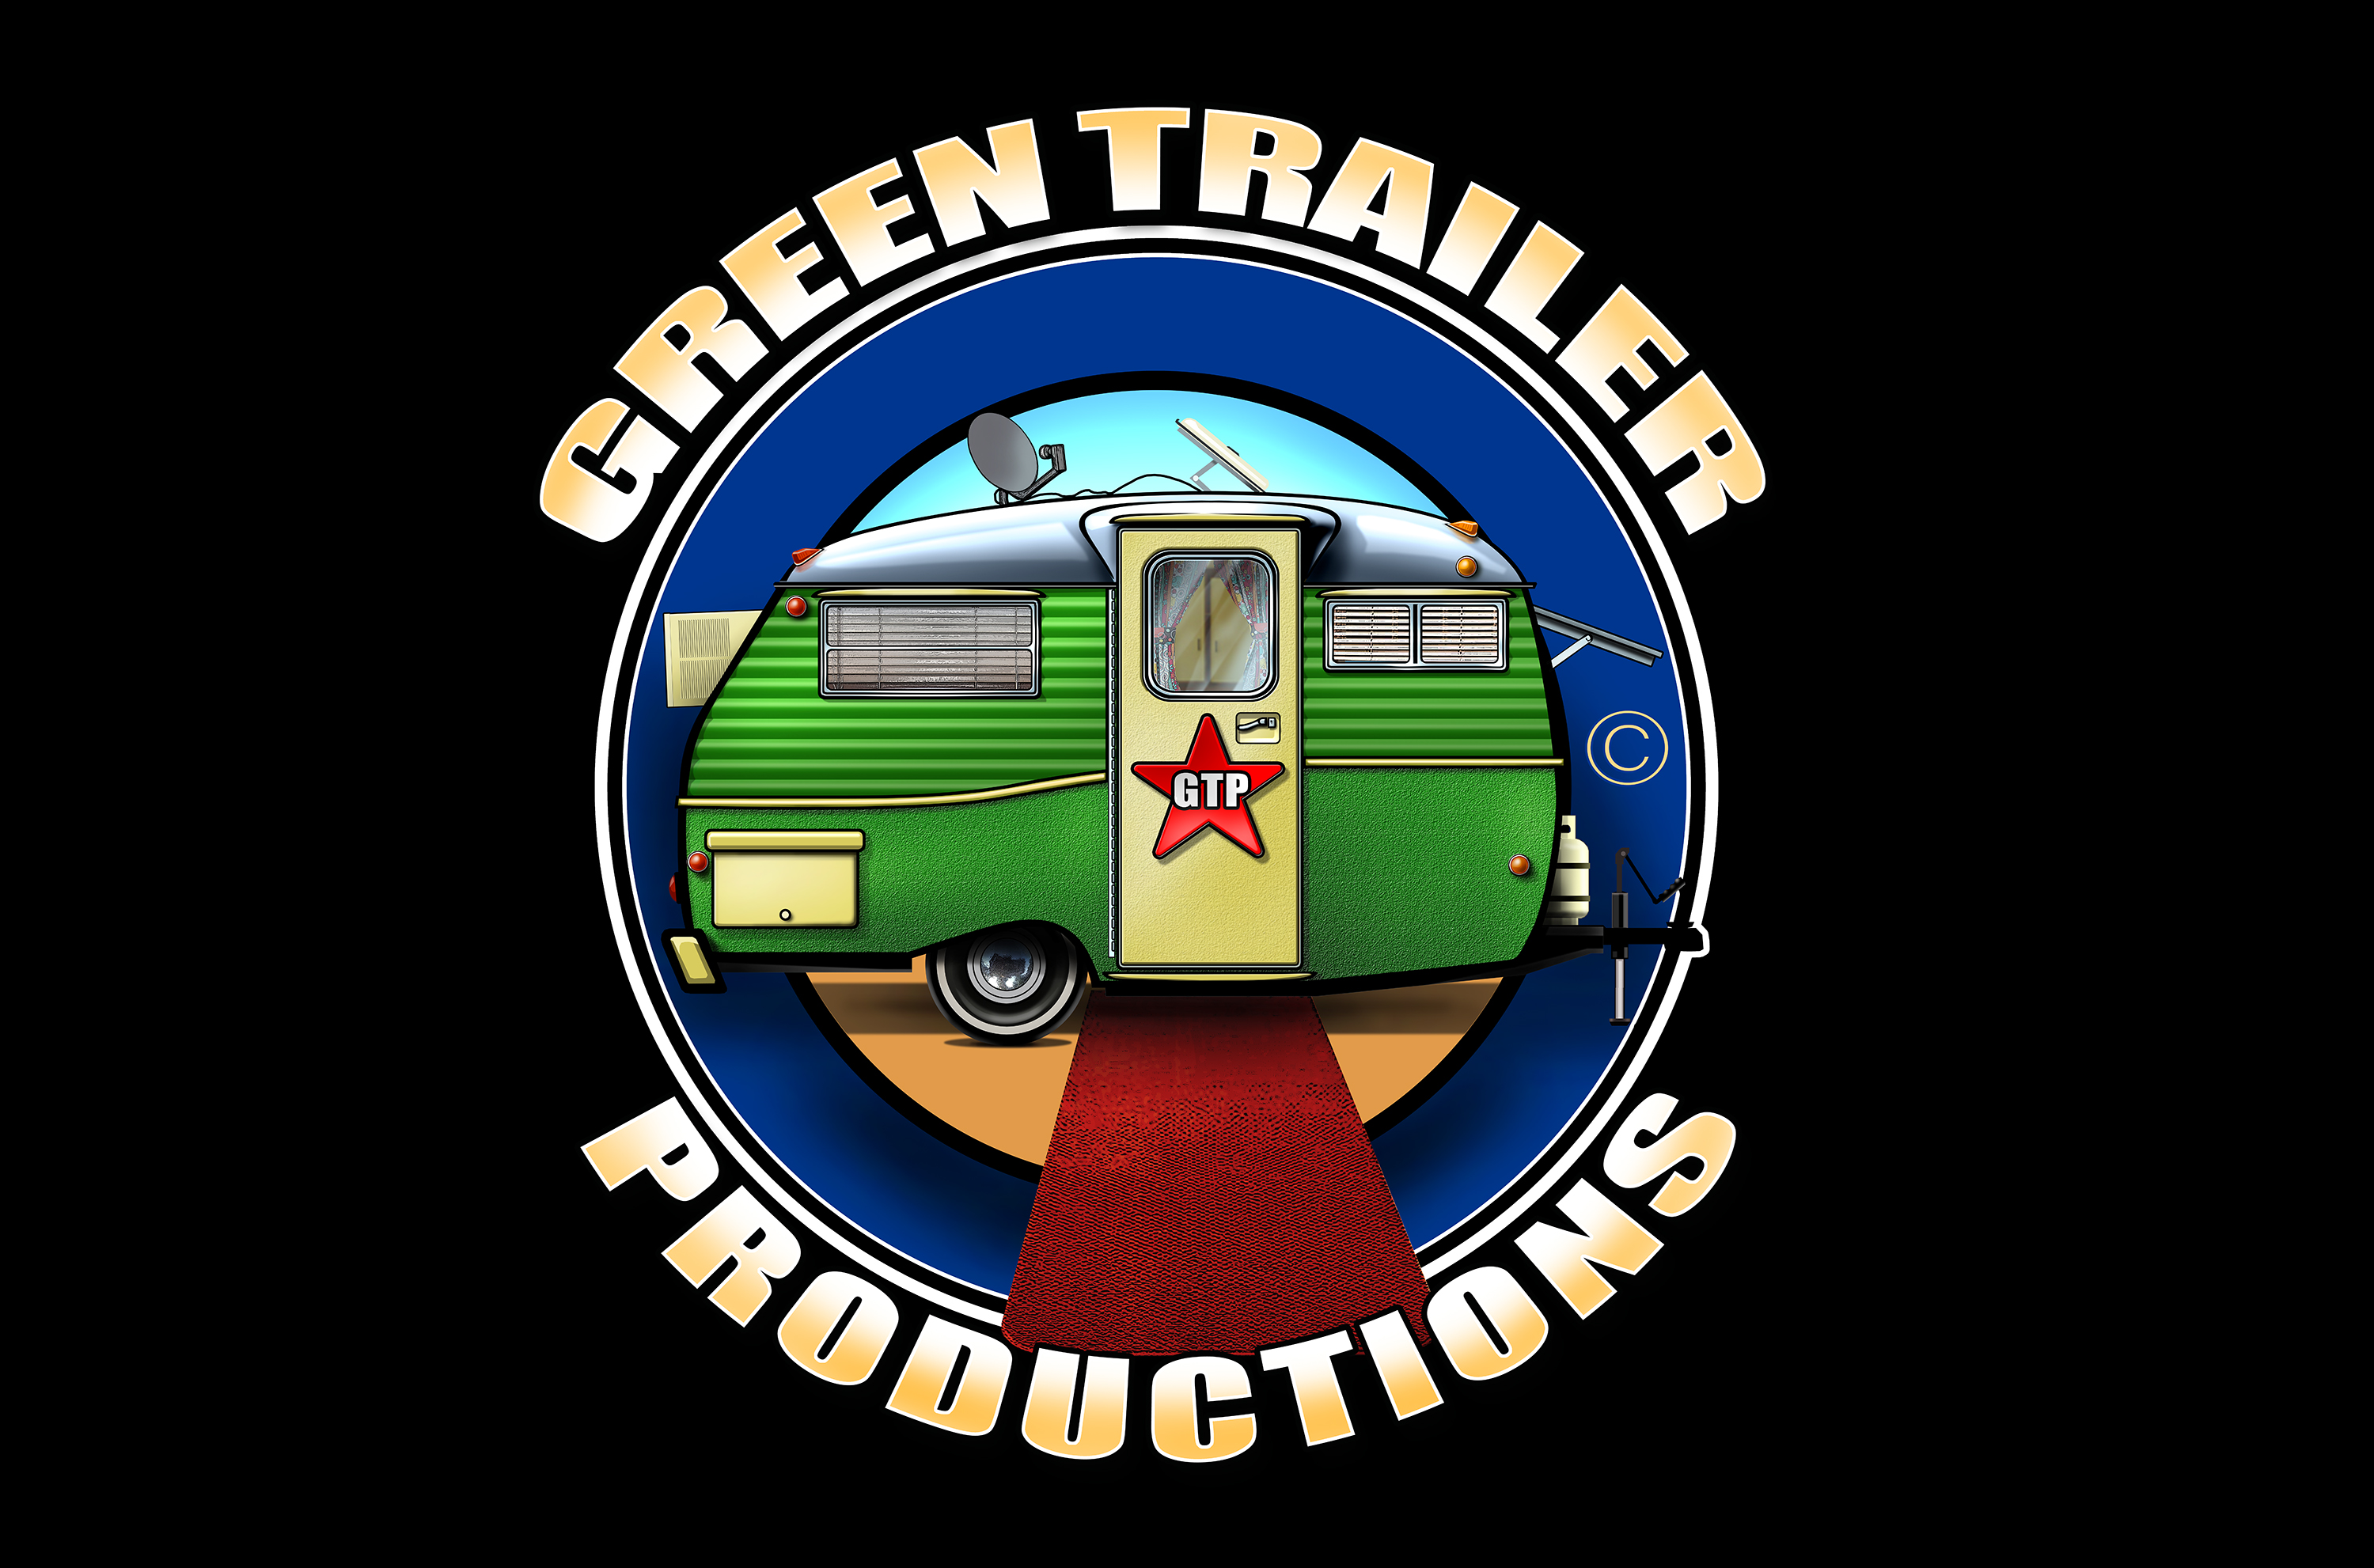 Green Trailer Productions